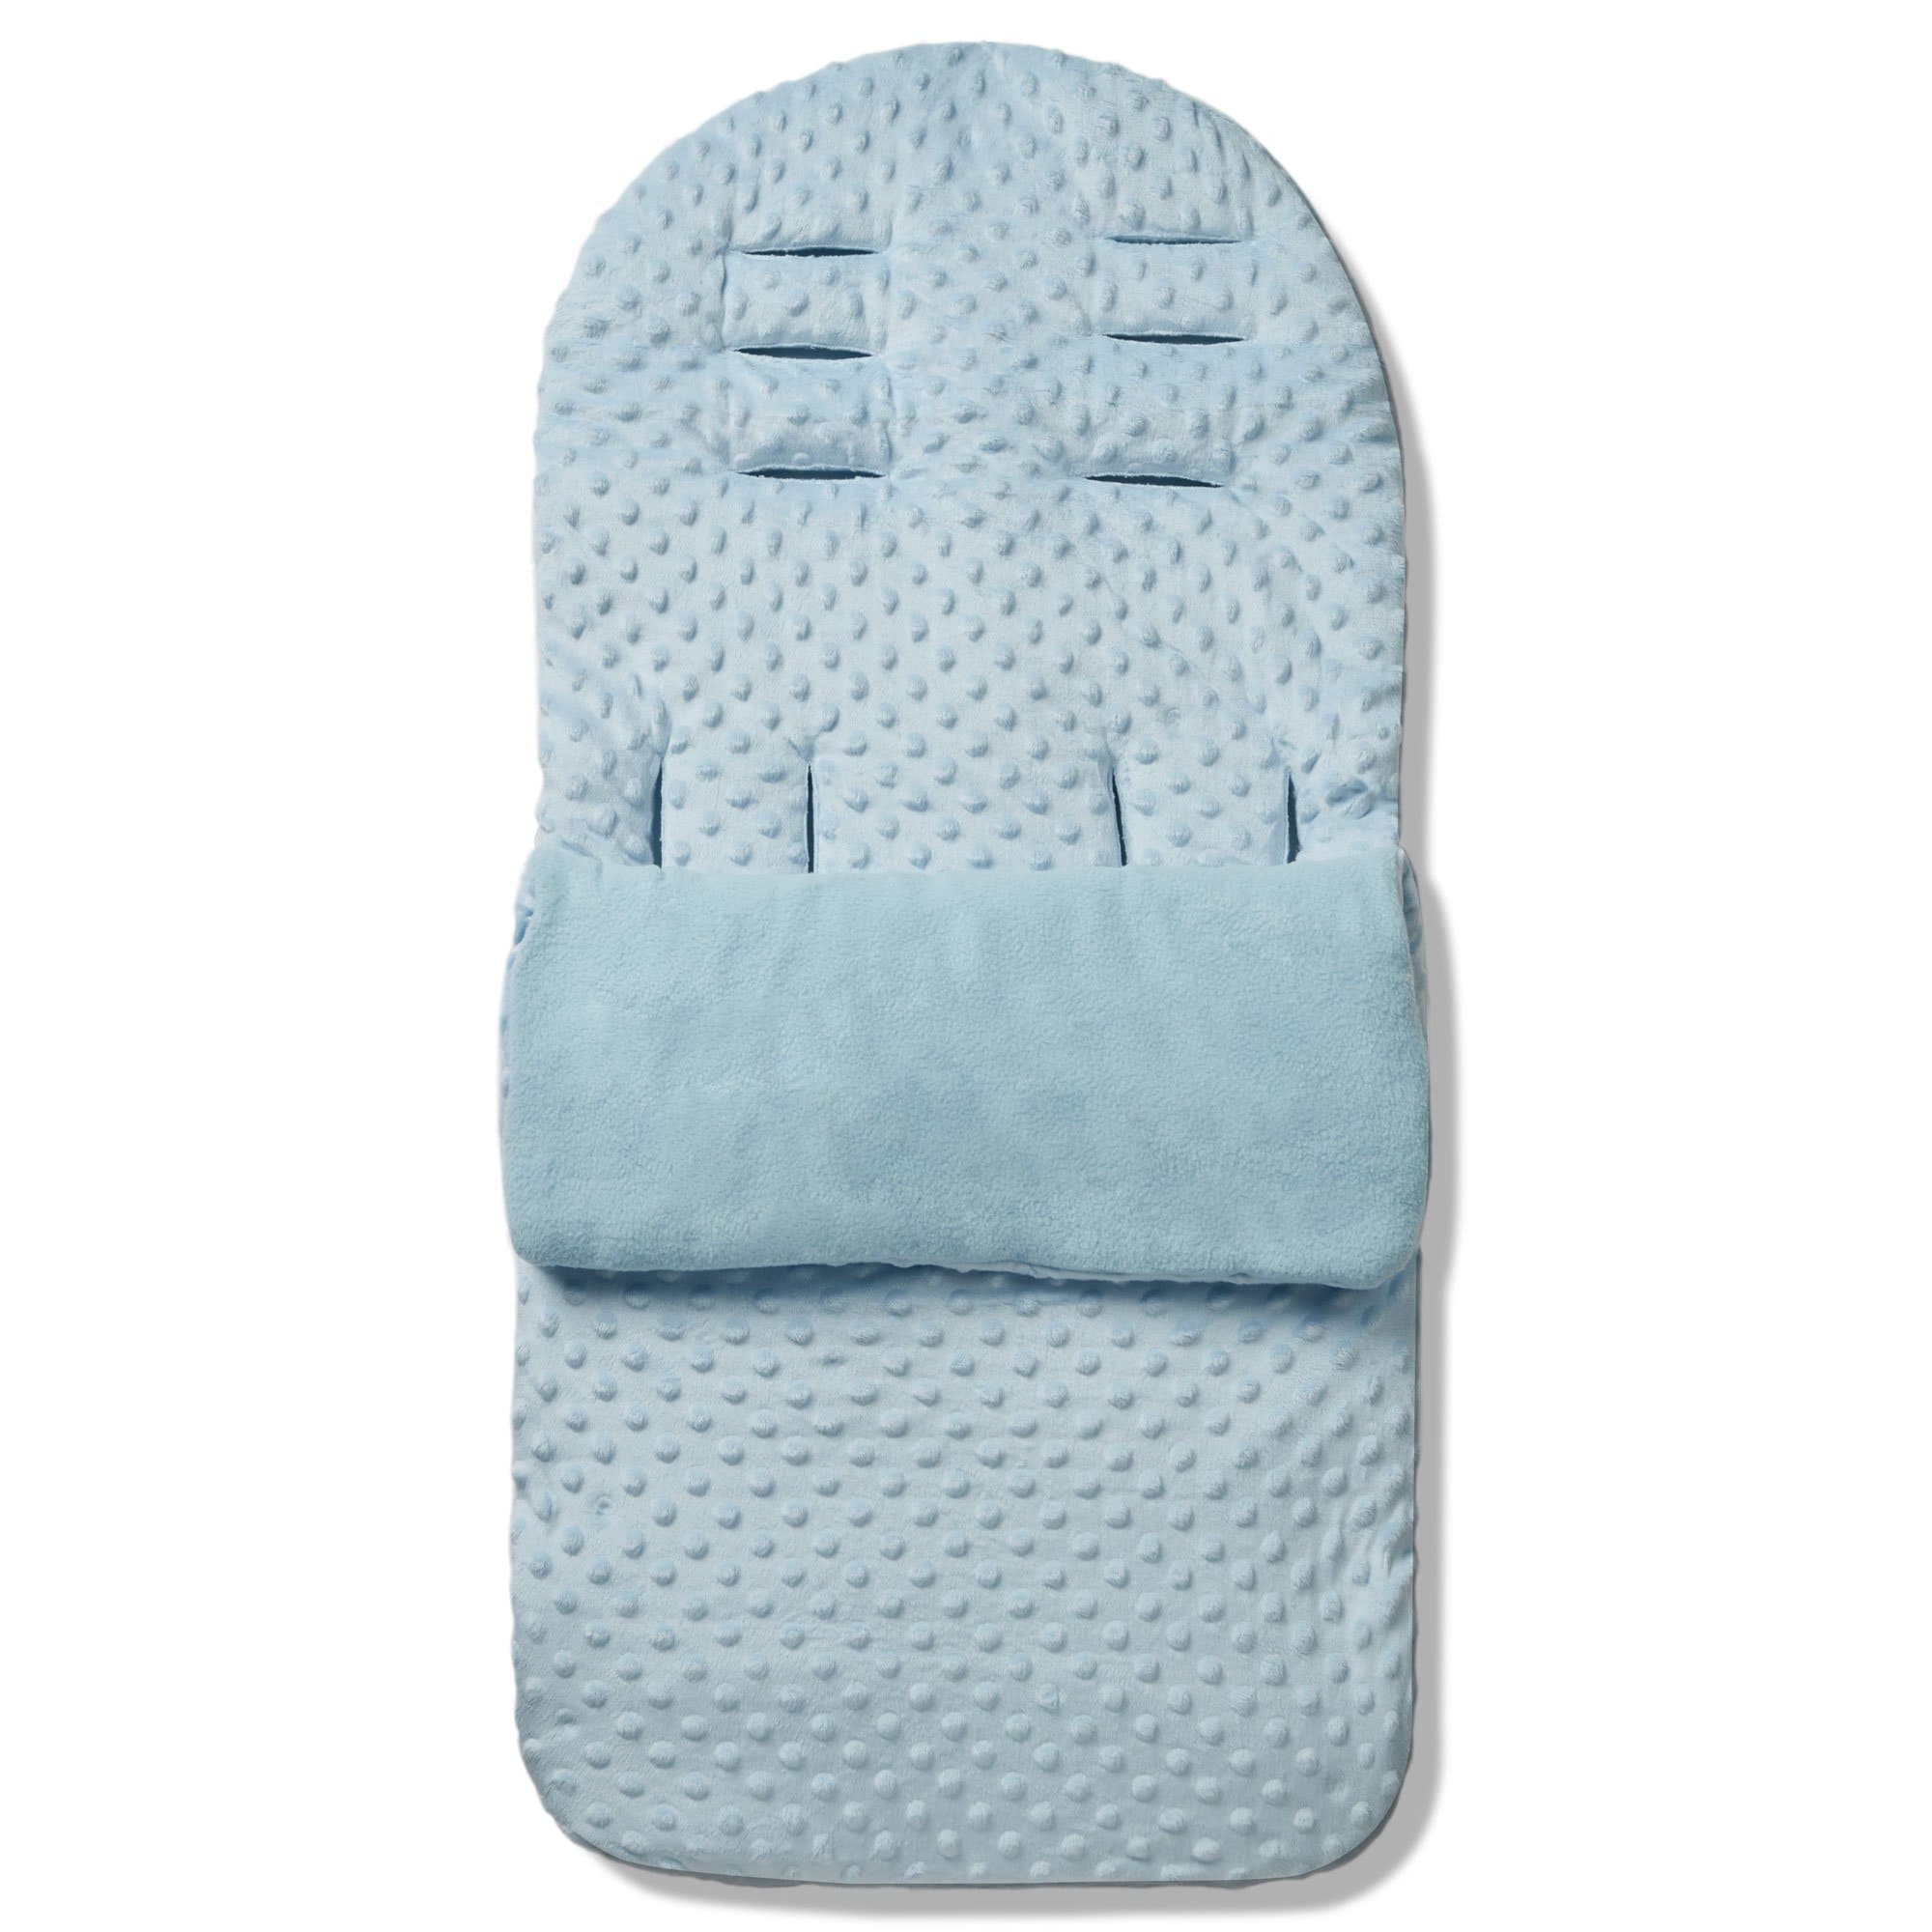 Dimple Footmuff / Cosy Toes Compatible with Cybex - Blue / Fits All Models | For Your Little One